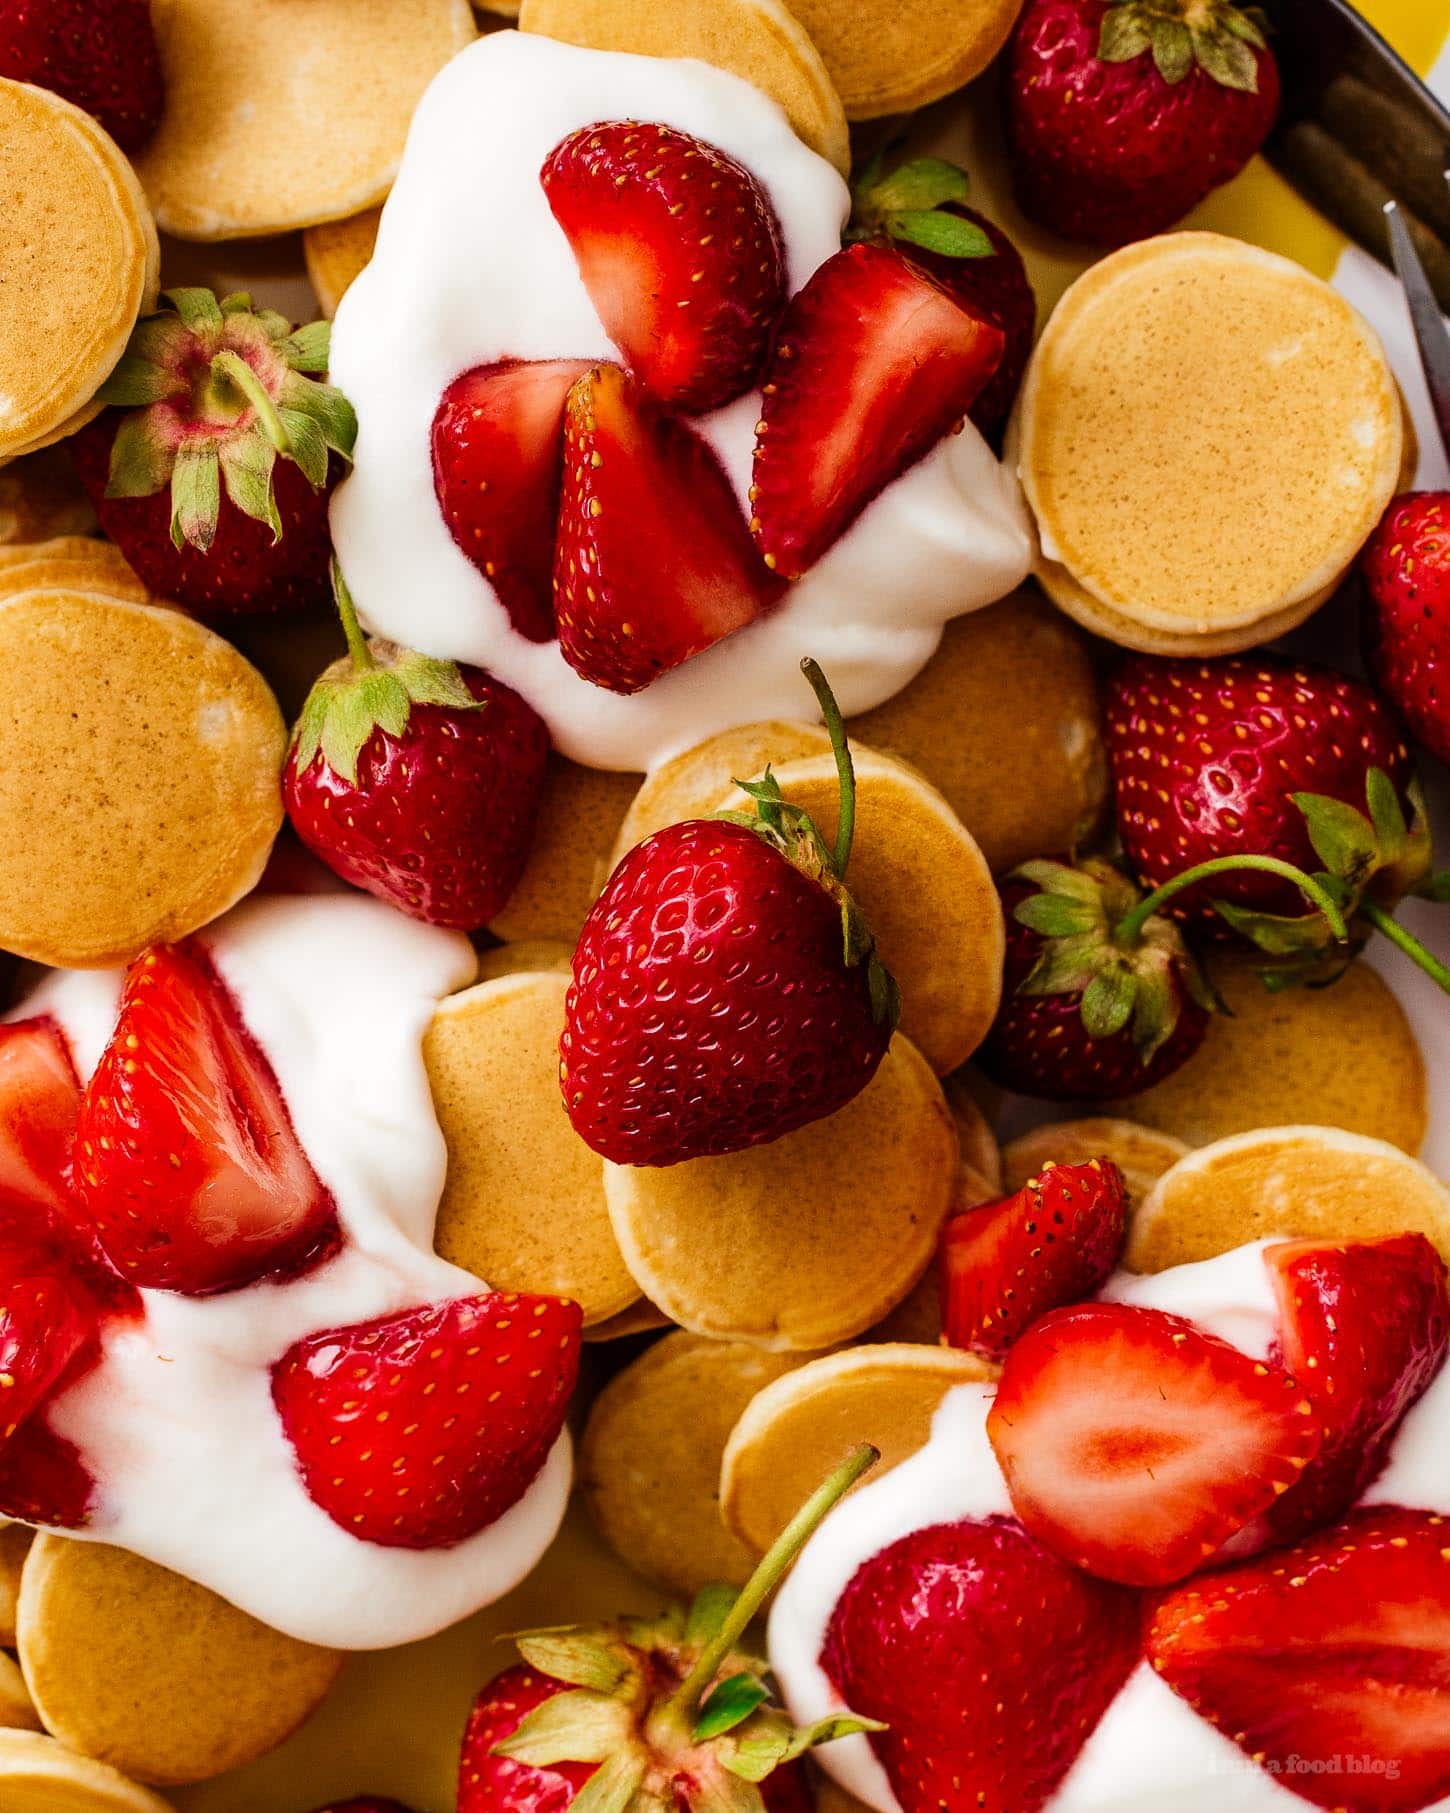 This fluffy mini strawberry shortcake pancake recipe is perfect for summer. Super cute mini silver dollar vanilla pancakes topped with juicy strawberries and softly whipped cream. Like a strawberry shortcake for breakfast! #strawberries #strawberry #strawberrypancakes #strawberrypancake #strawberryshortcake #strawberryshortcakes